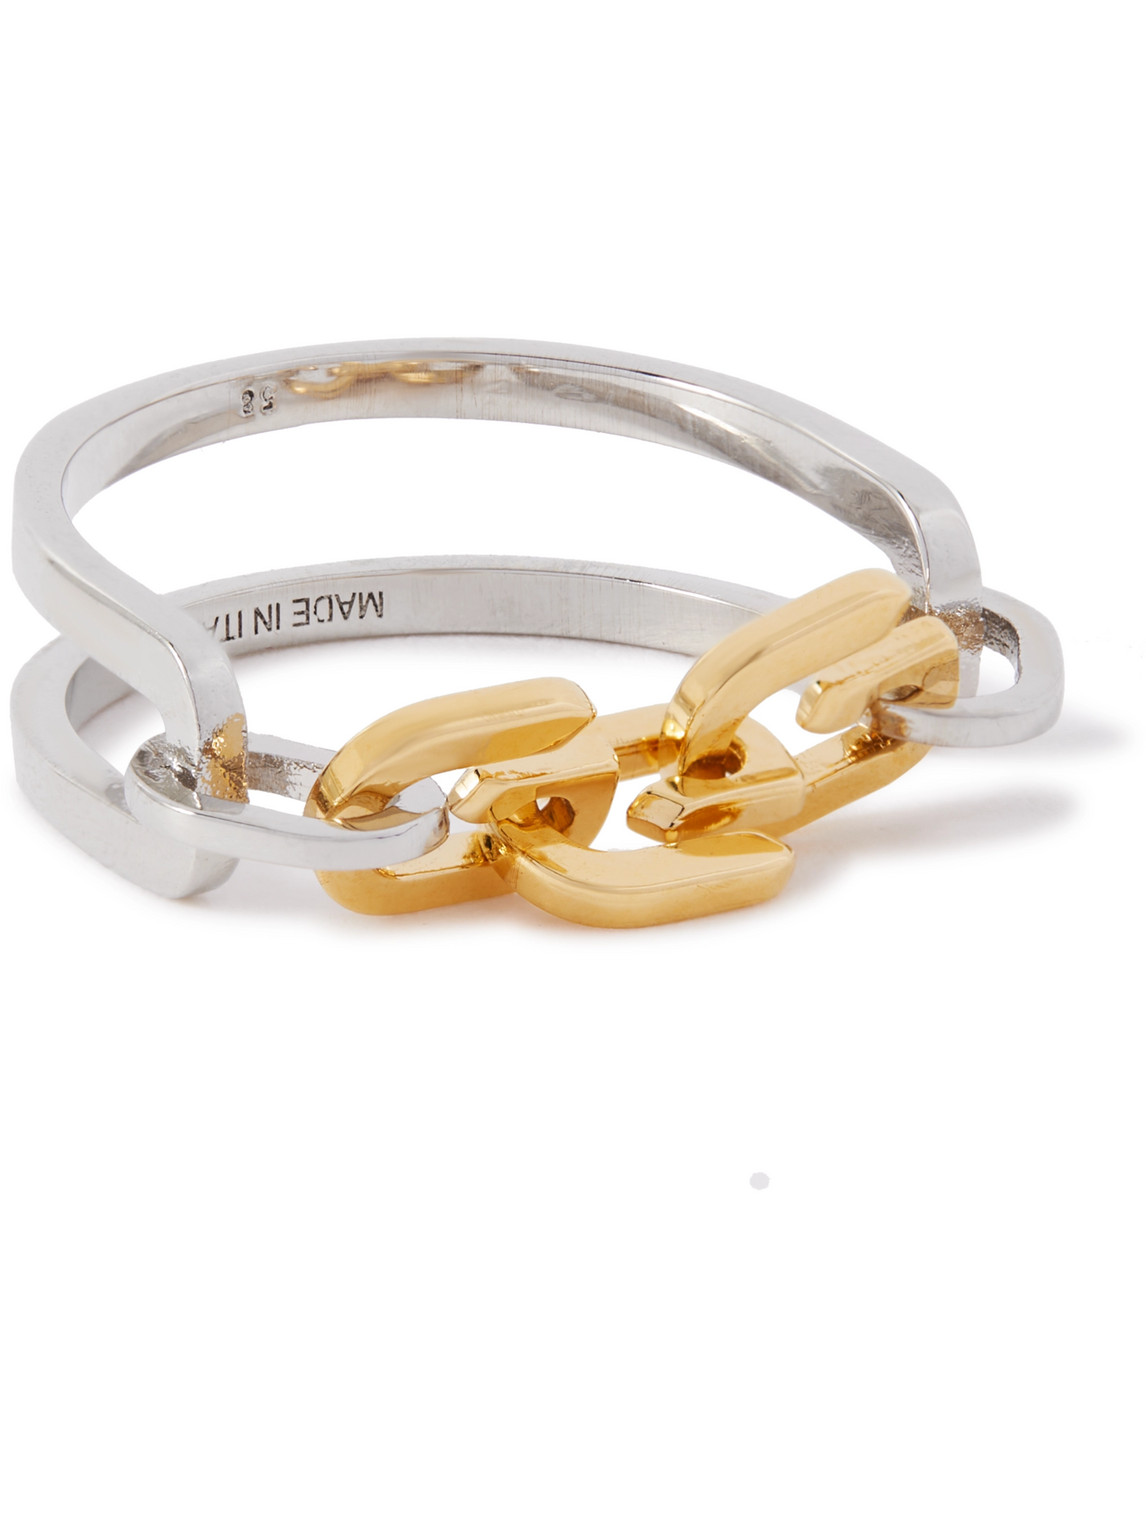 G Link Silver and Gold-Tone Ring